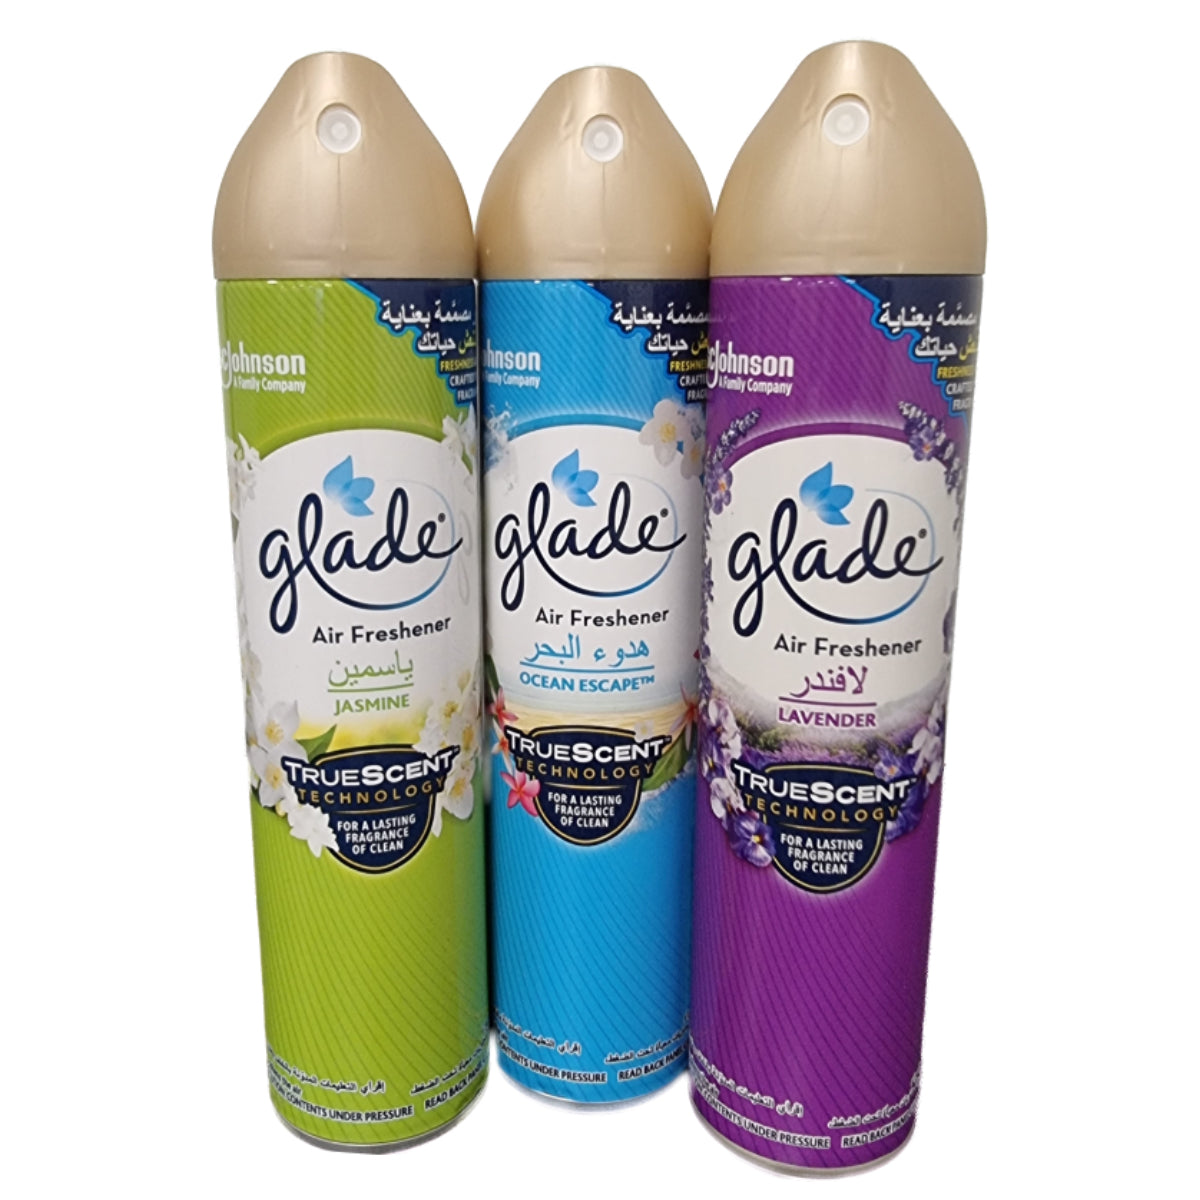 Glade Air Freshener, 300ml, Assorted Scents